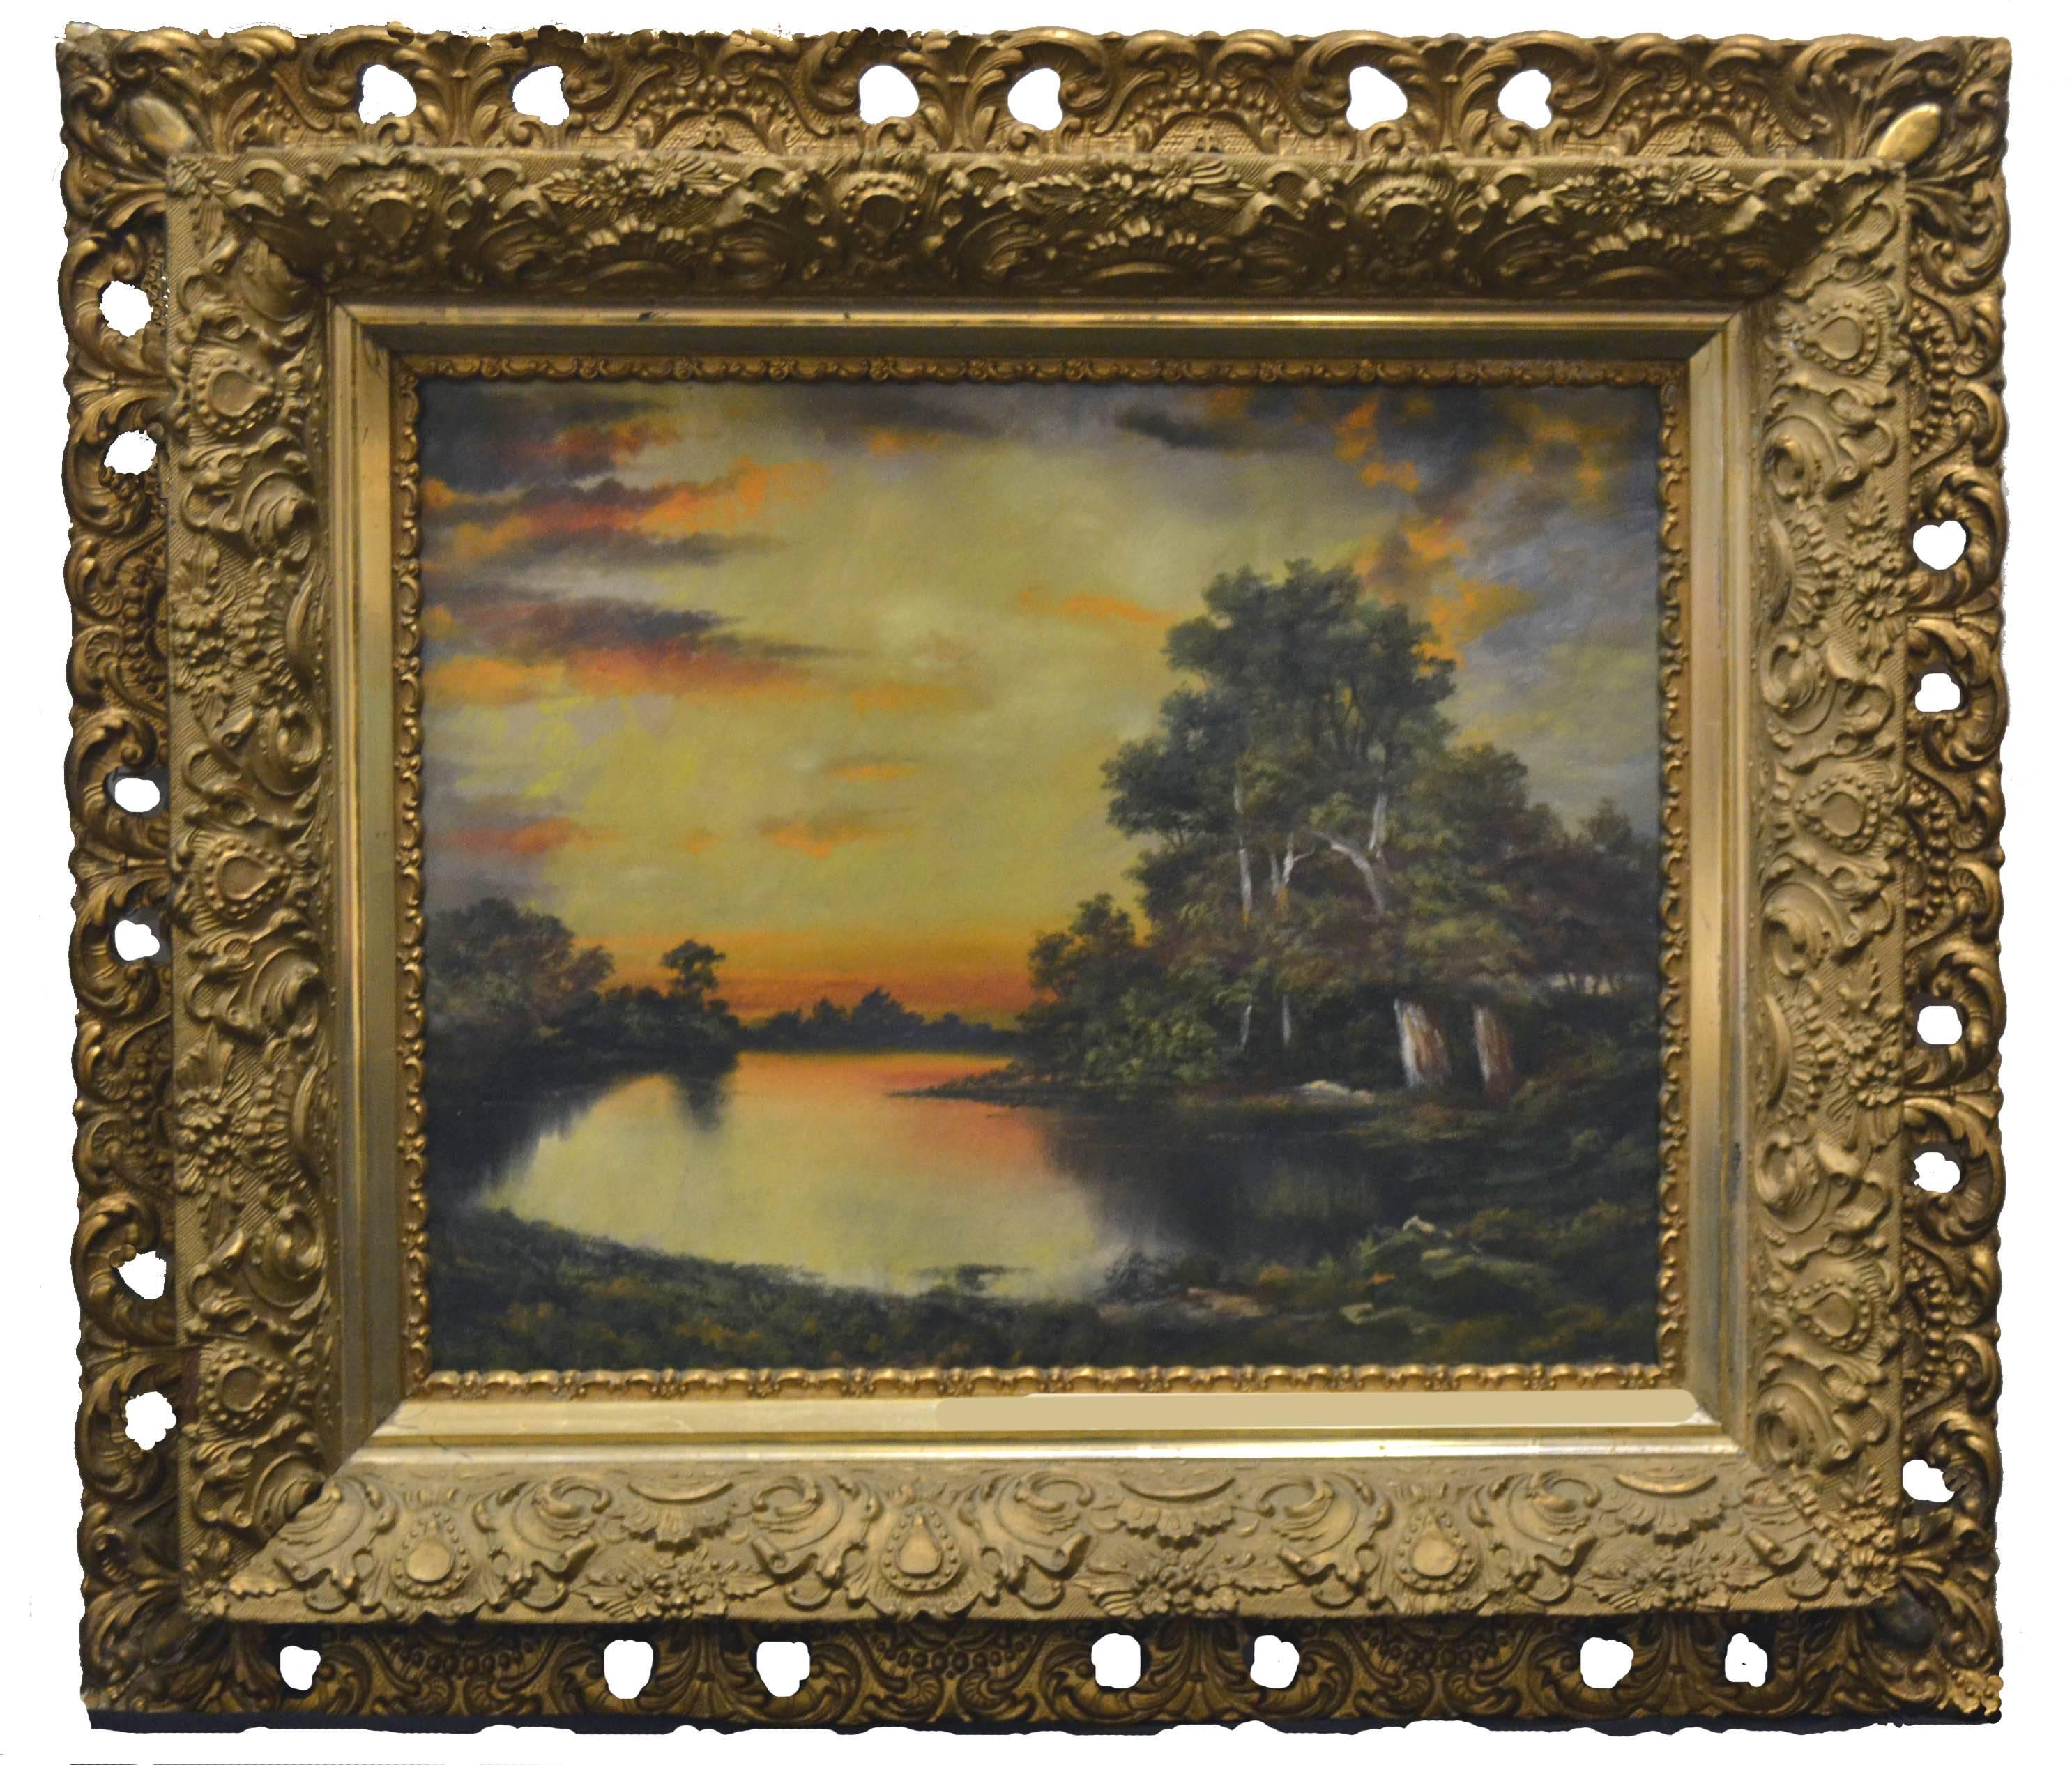 Unknown Landscape Painting - Sunset Over Lake, Late 19th Century Hudson River School Pastel Landscape 